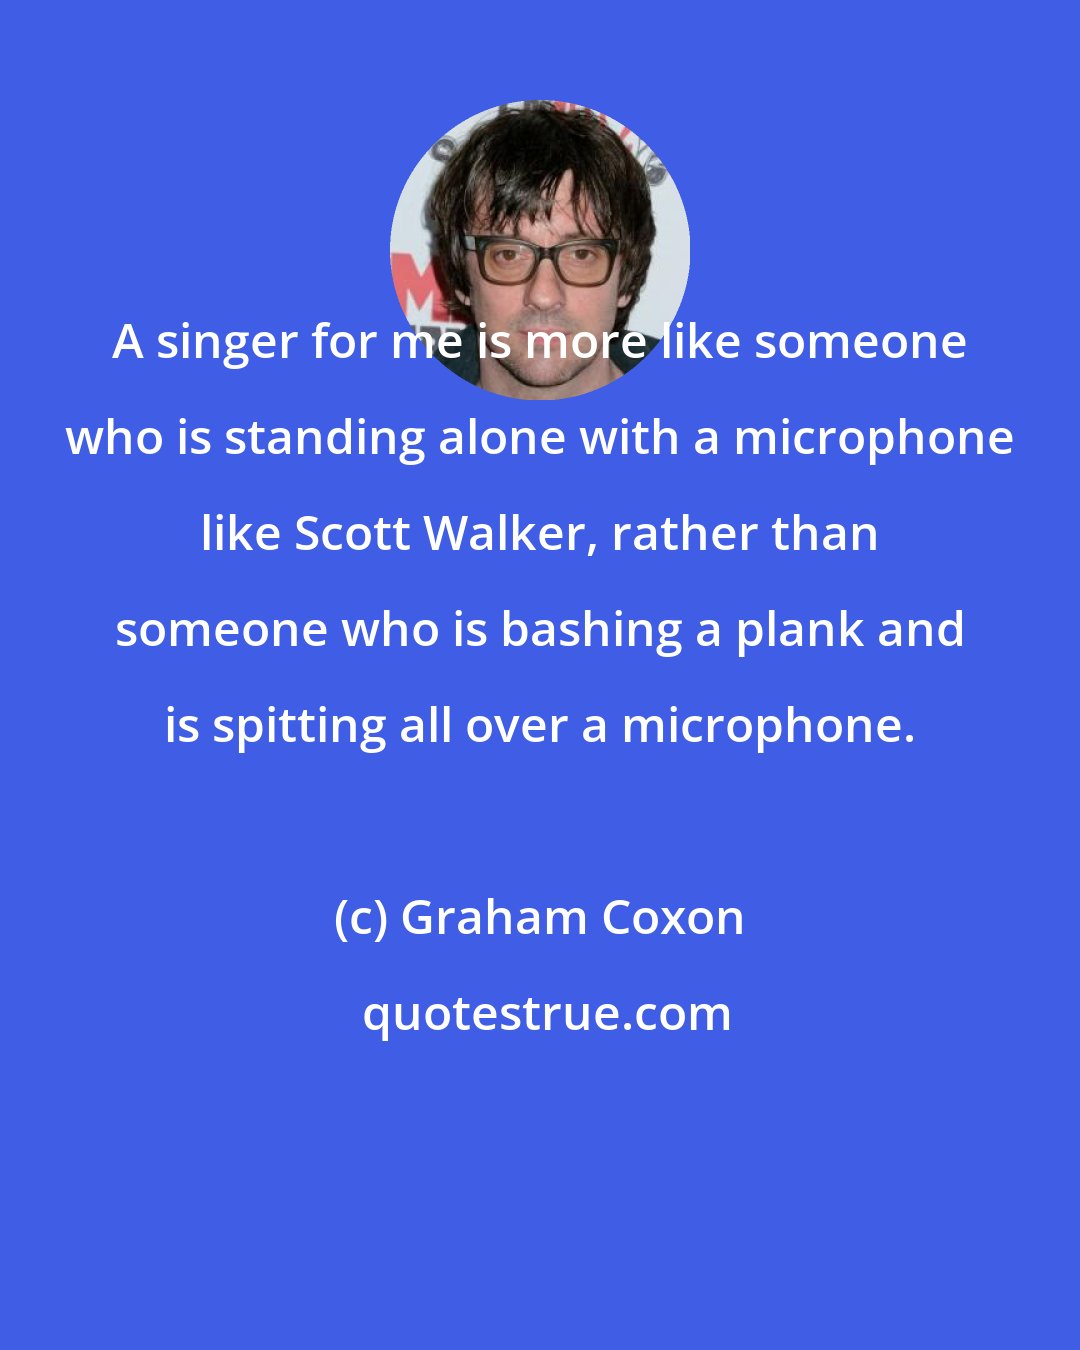 Graham Coxon: A singer for me is more like someone who is standing alone with a microphone like Scott Walker, rather than someone who is bashing a plank and is spitting all over a microphone.